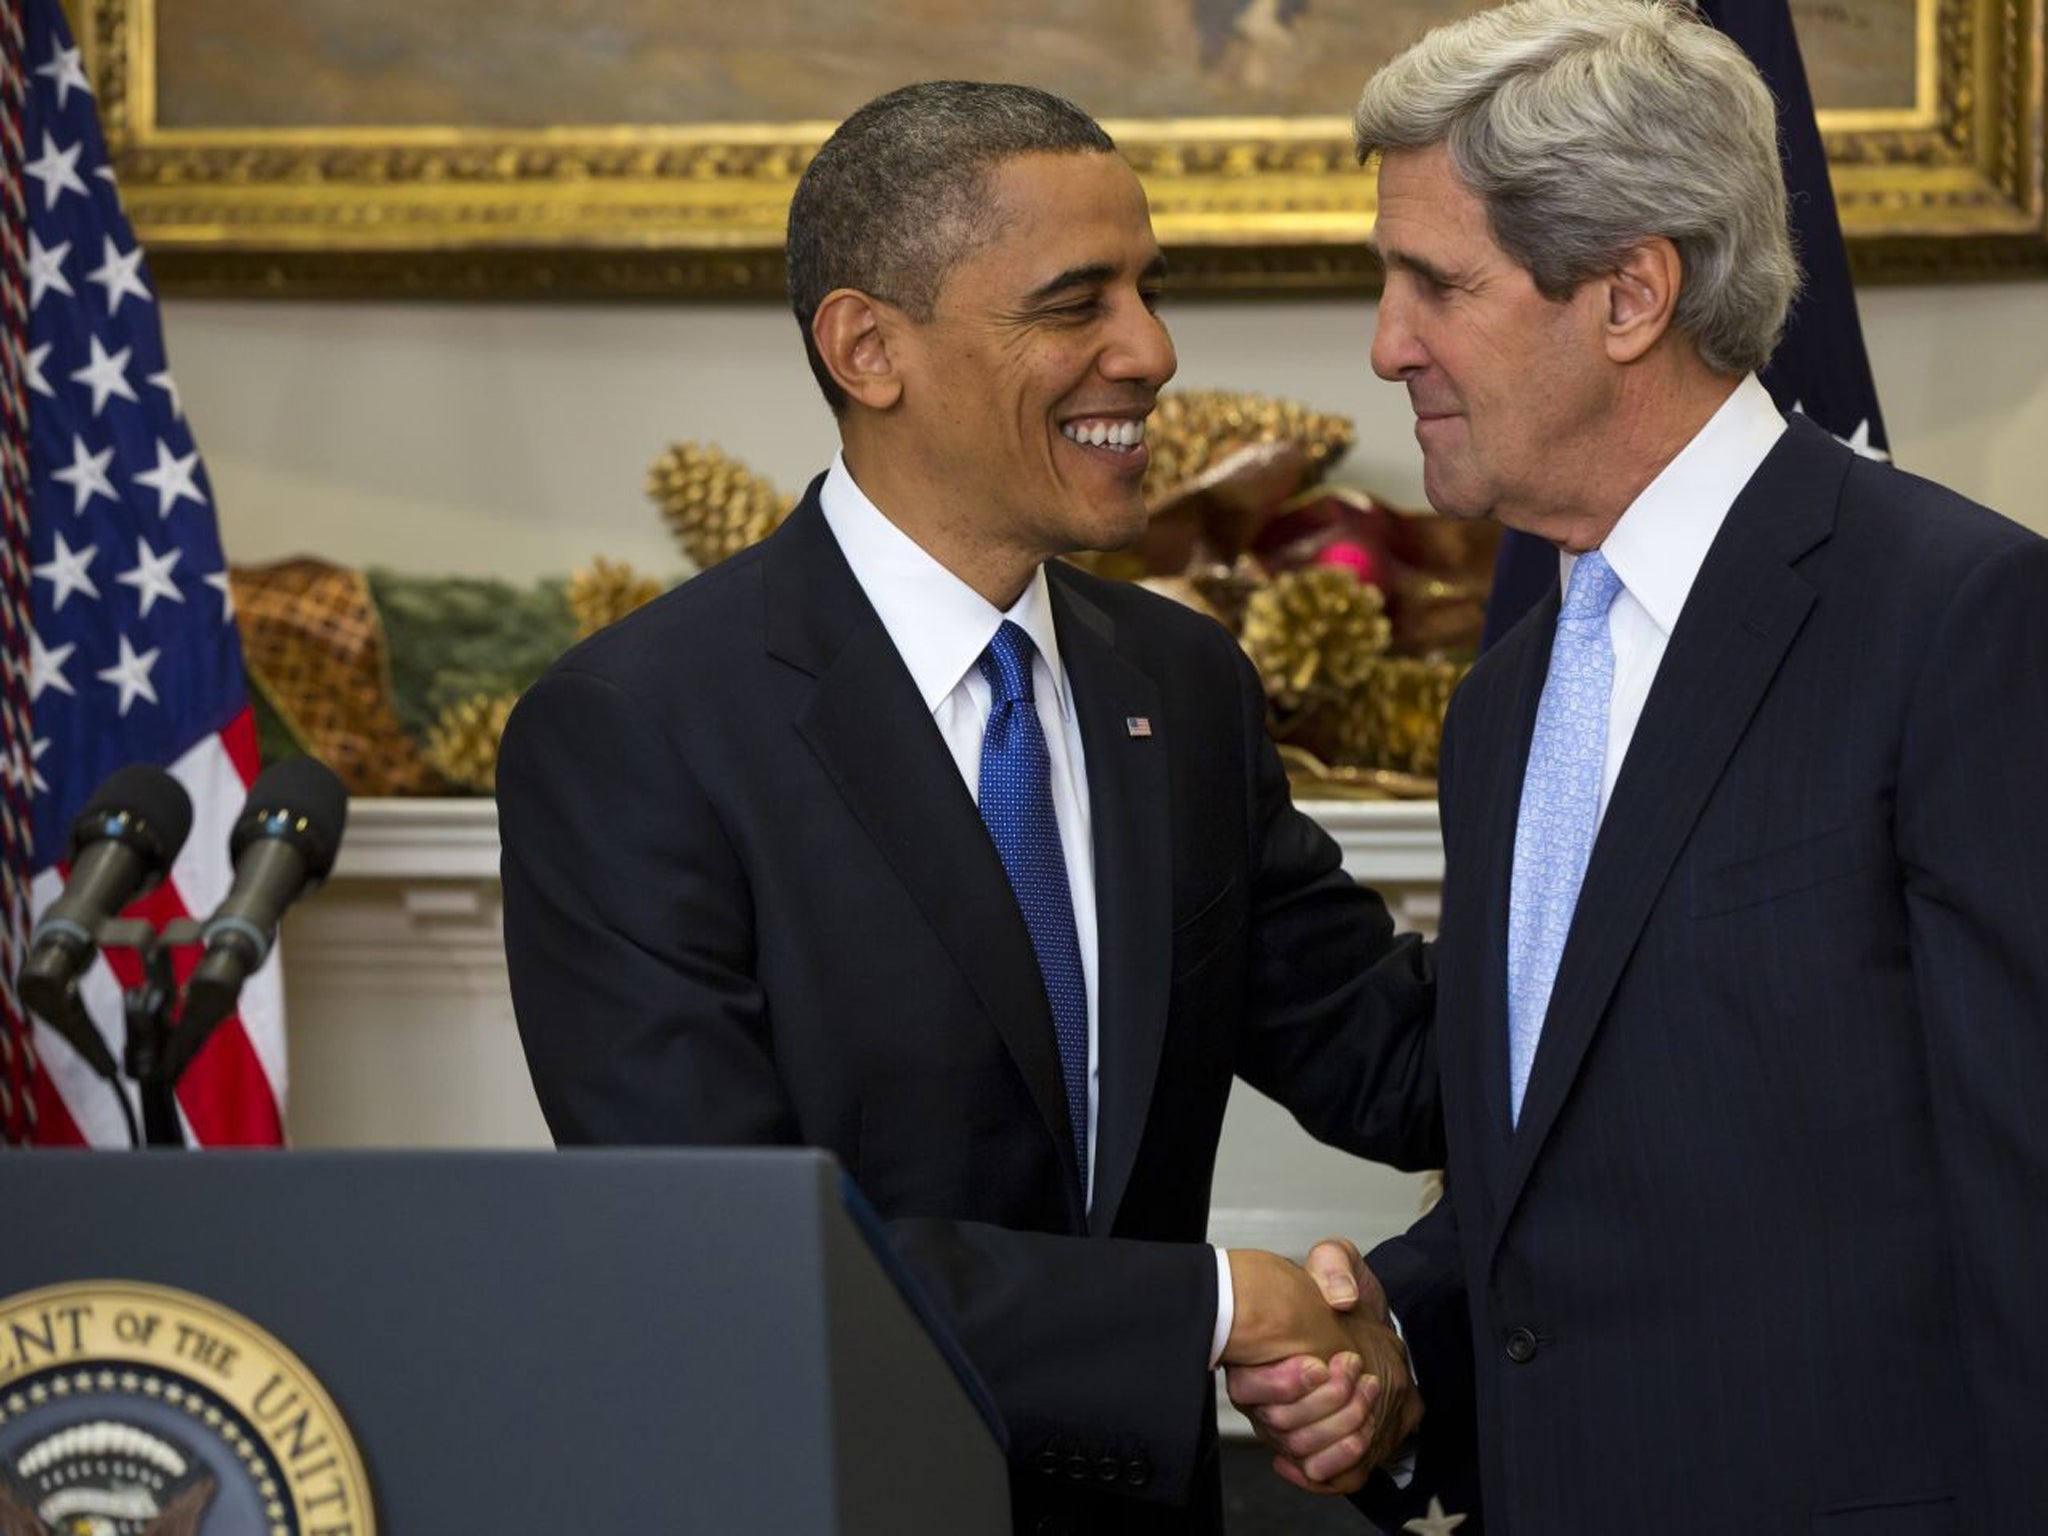 Barack Obama and John Kerry at the announcement yesterday